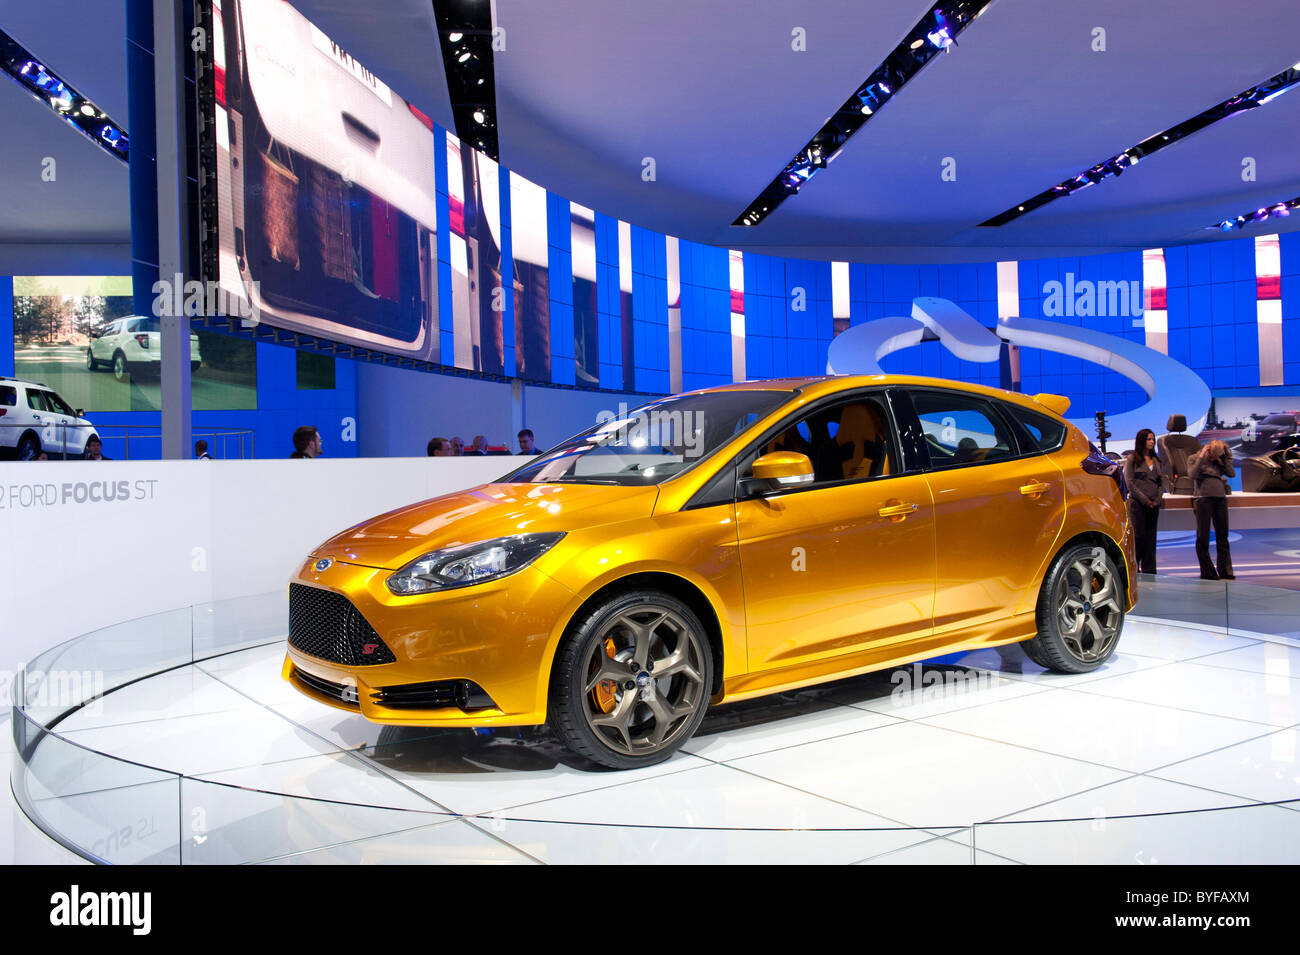 2012 Ford Focus ST at the 2012 North American International Auto Show in Detroit Stock Photo